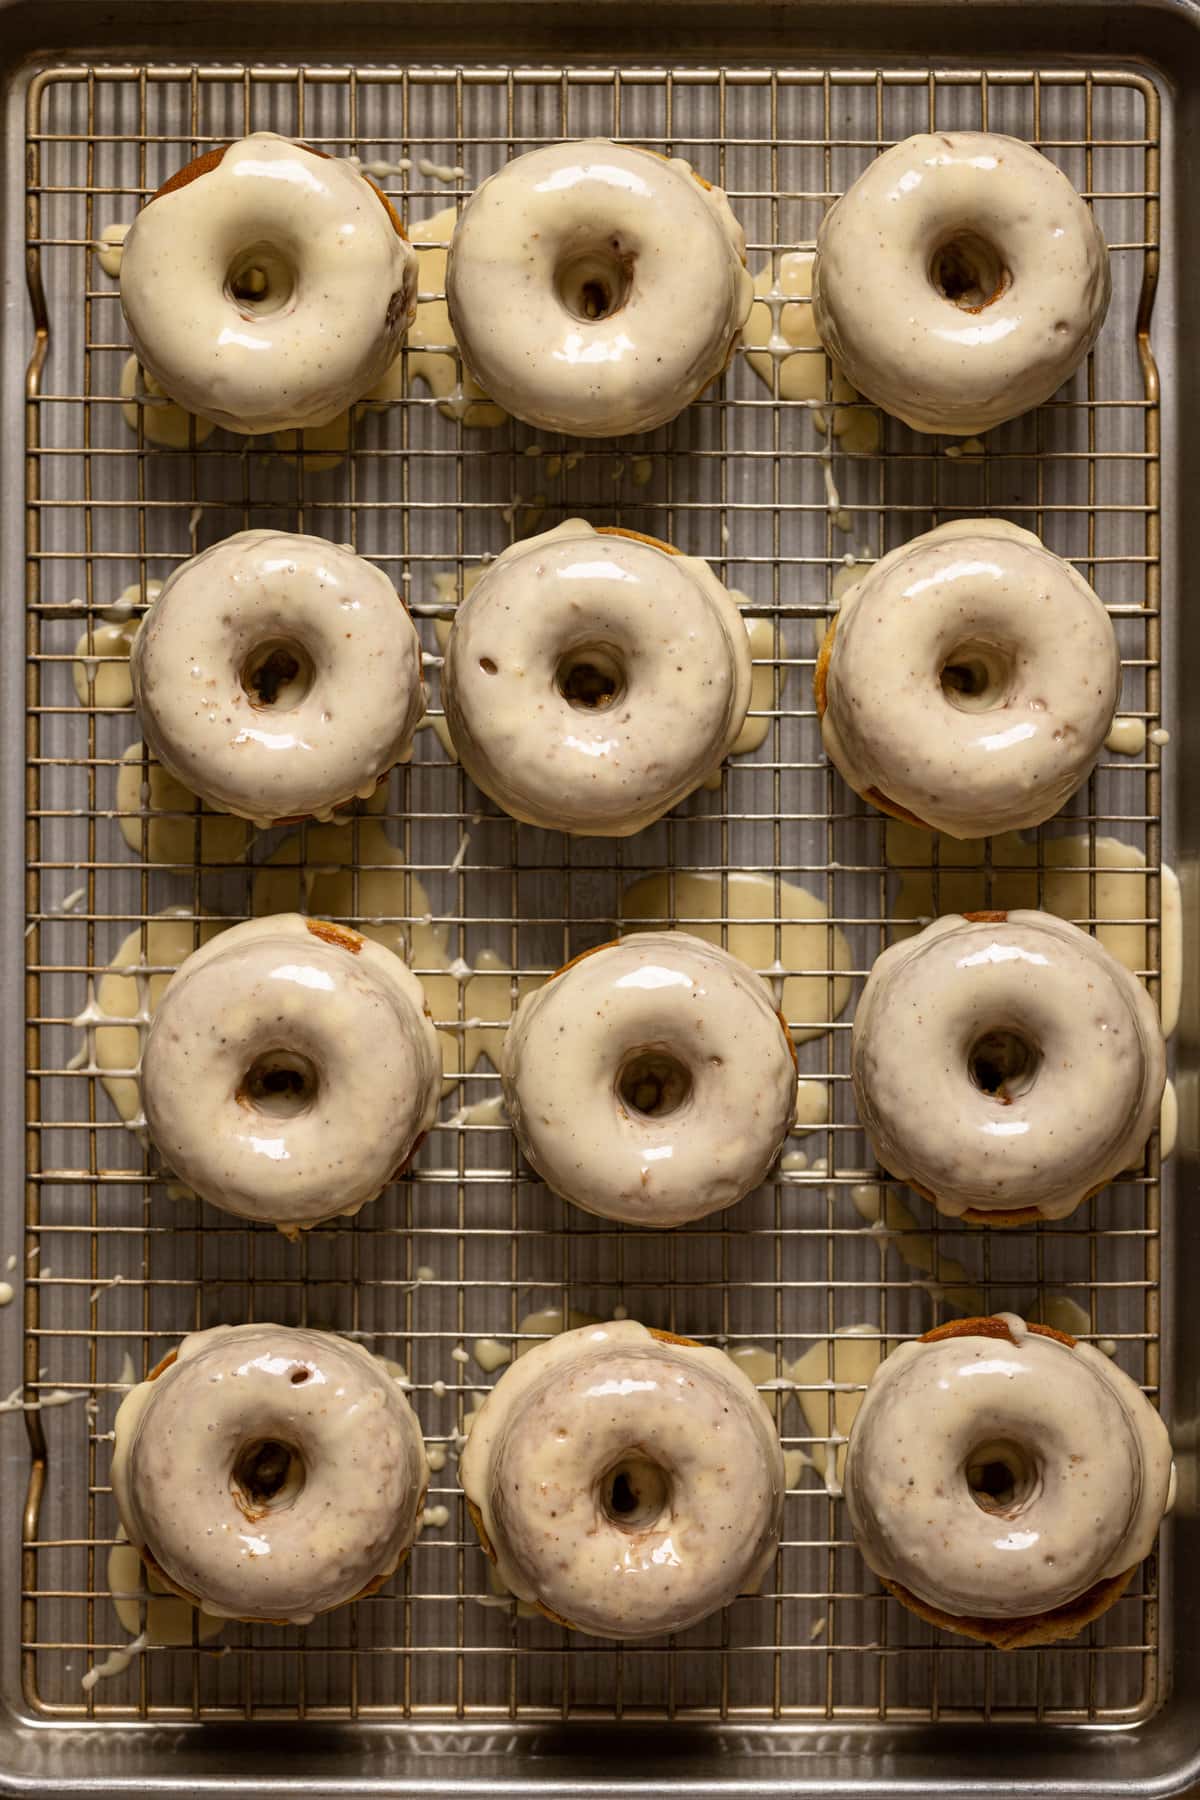 Overview of donuts atop a cooling rack with glaze.